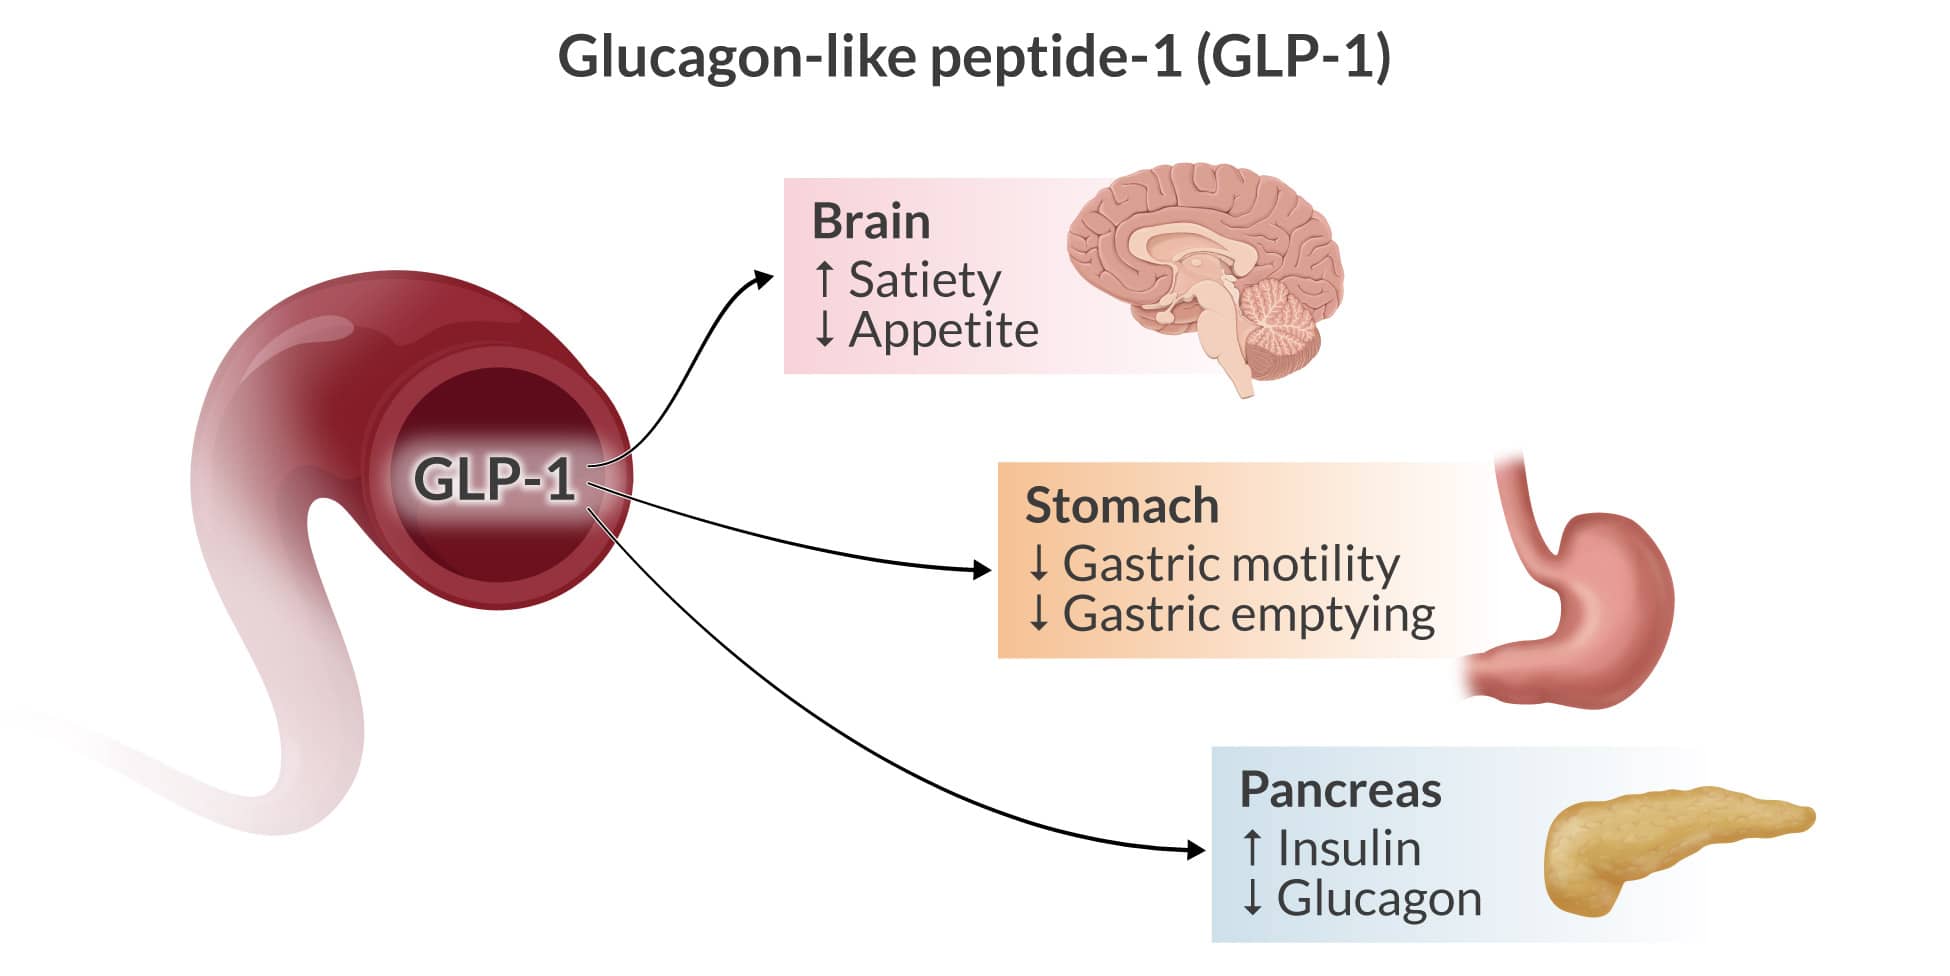 infographic detailing GLP-1 impacts on the brain, stomach, and pancreas